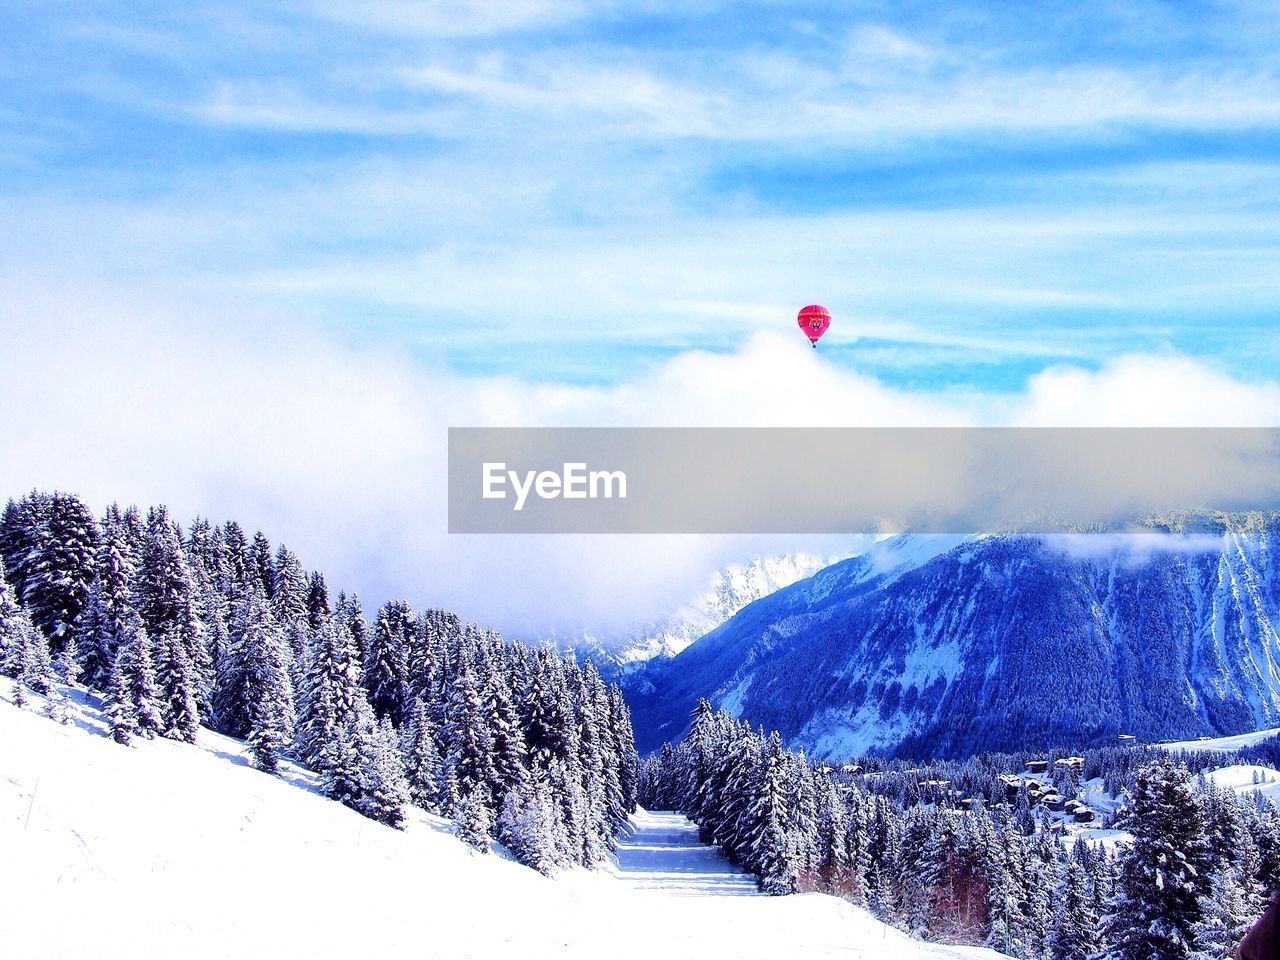 Red hot air balloon over snowcapped mountains against cloudy sky